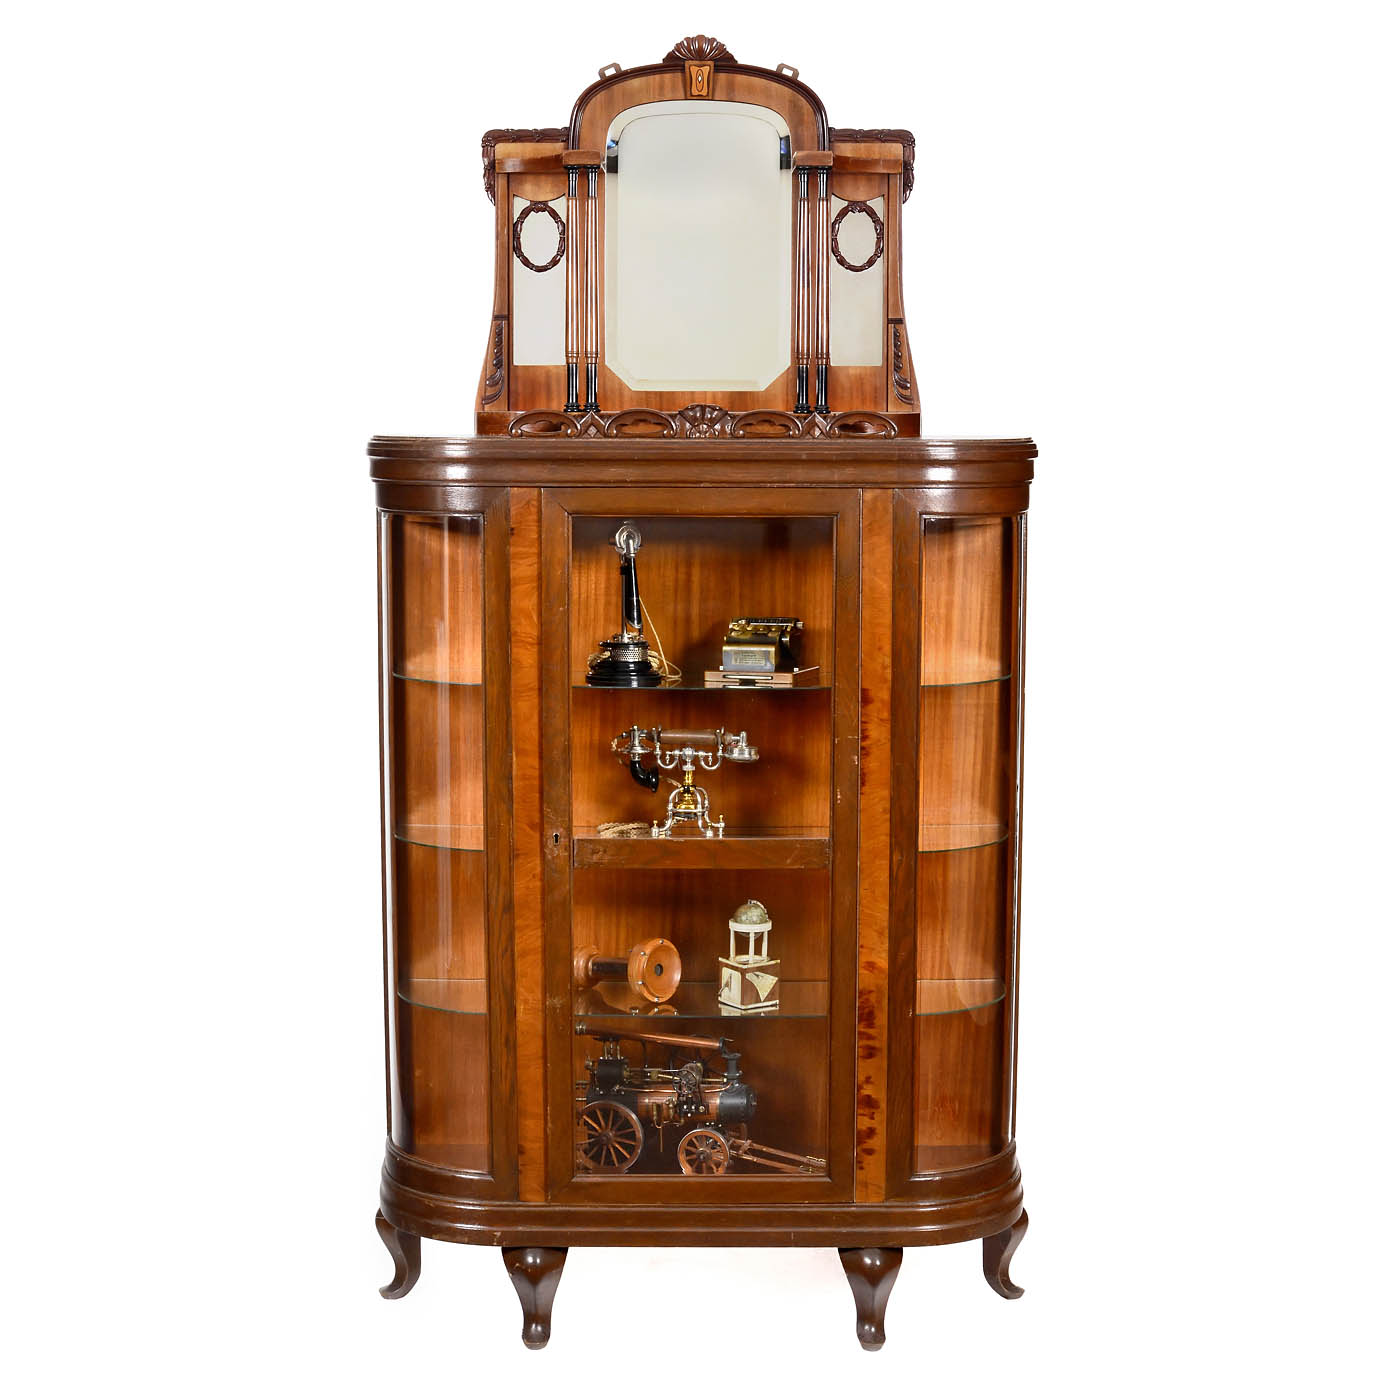 Display Cabinet with Mirror Top, c. 1920 - Image 2 of 2